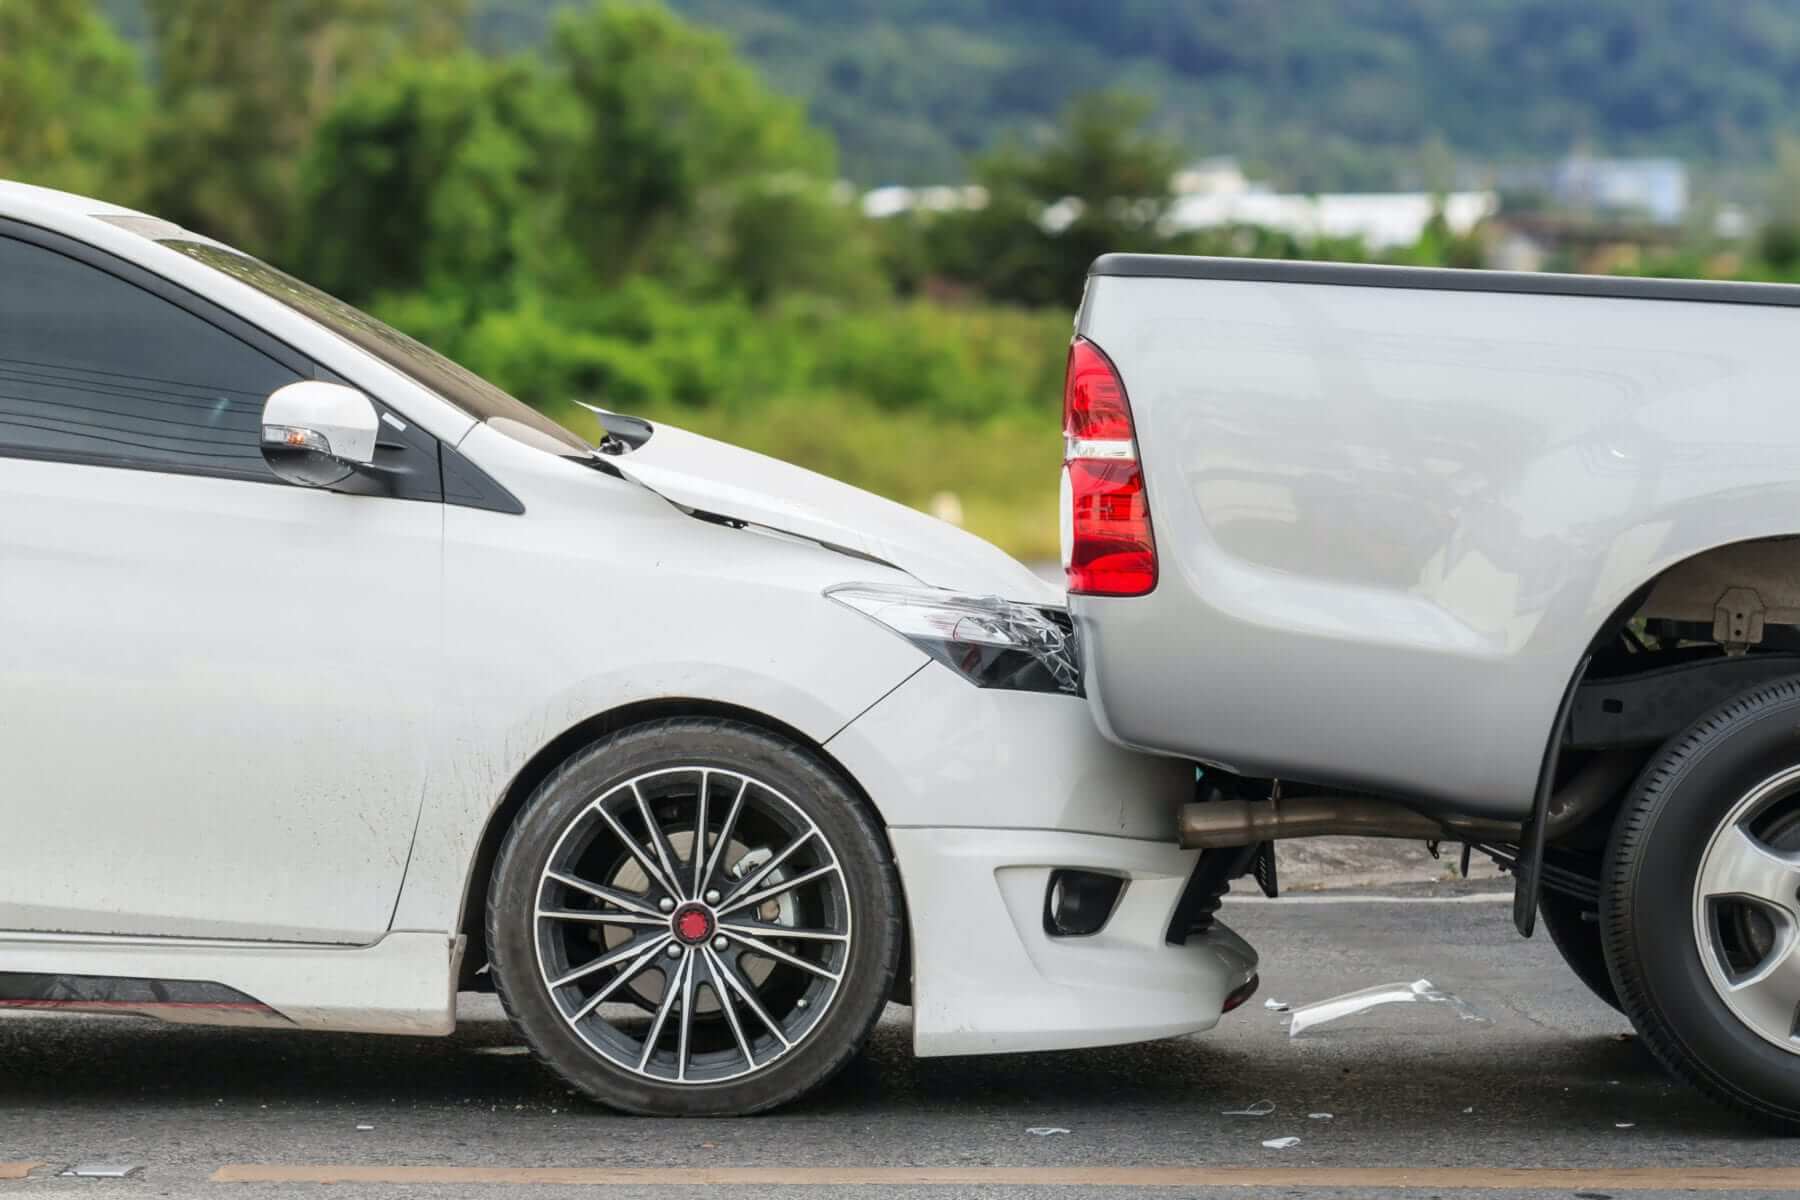 Understanding the Differences: Claims between Truck Accidents and Car Accidents